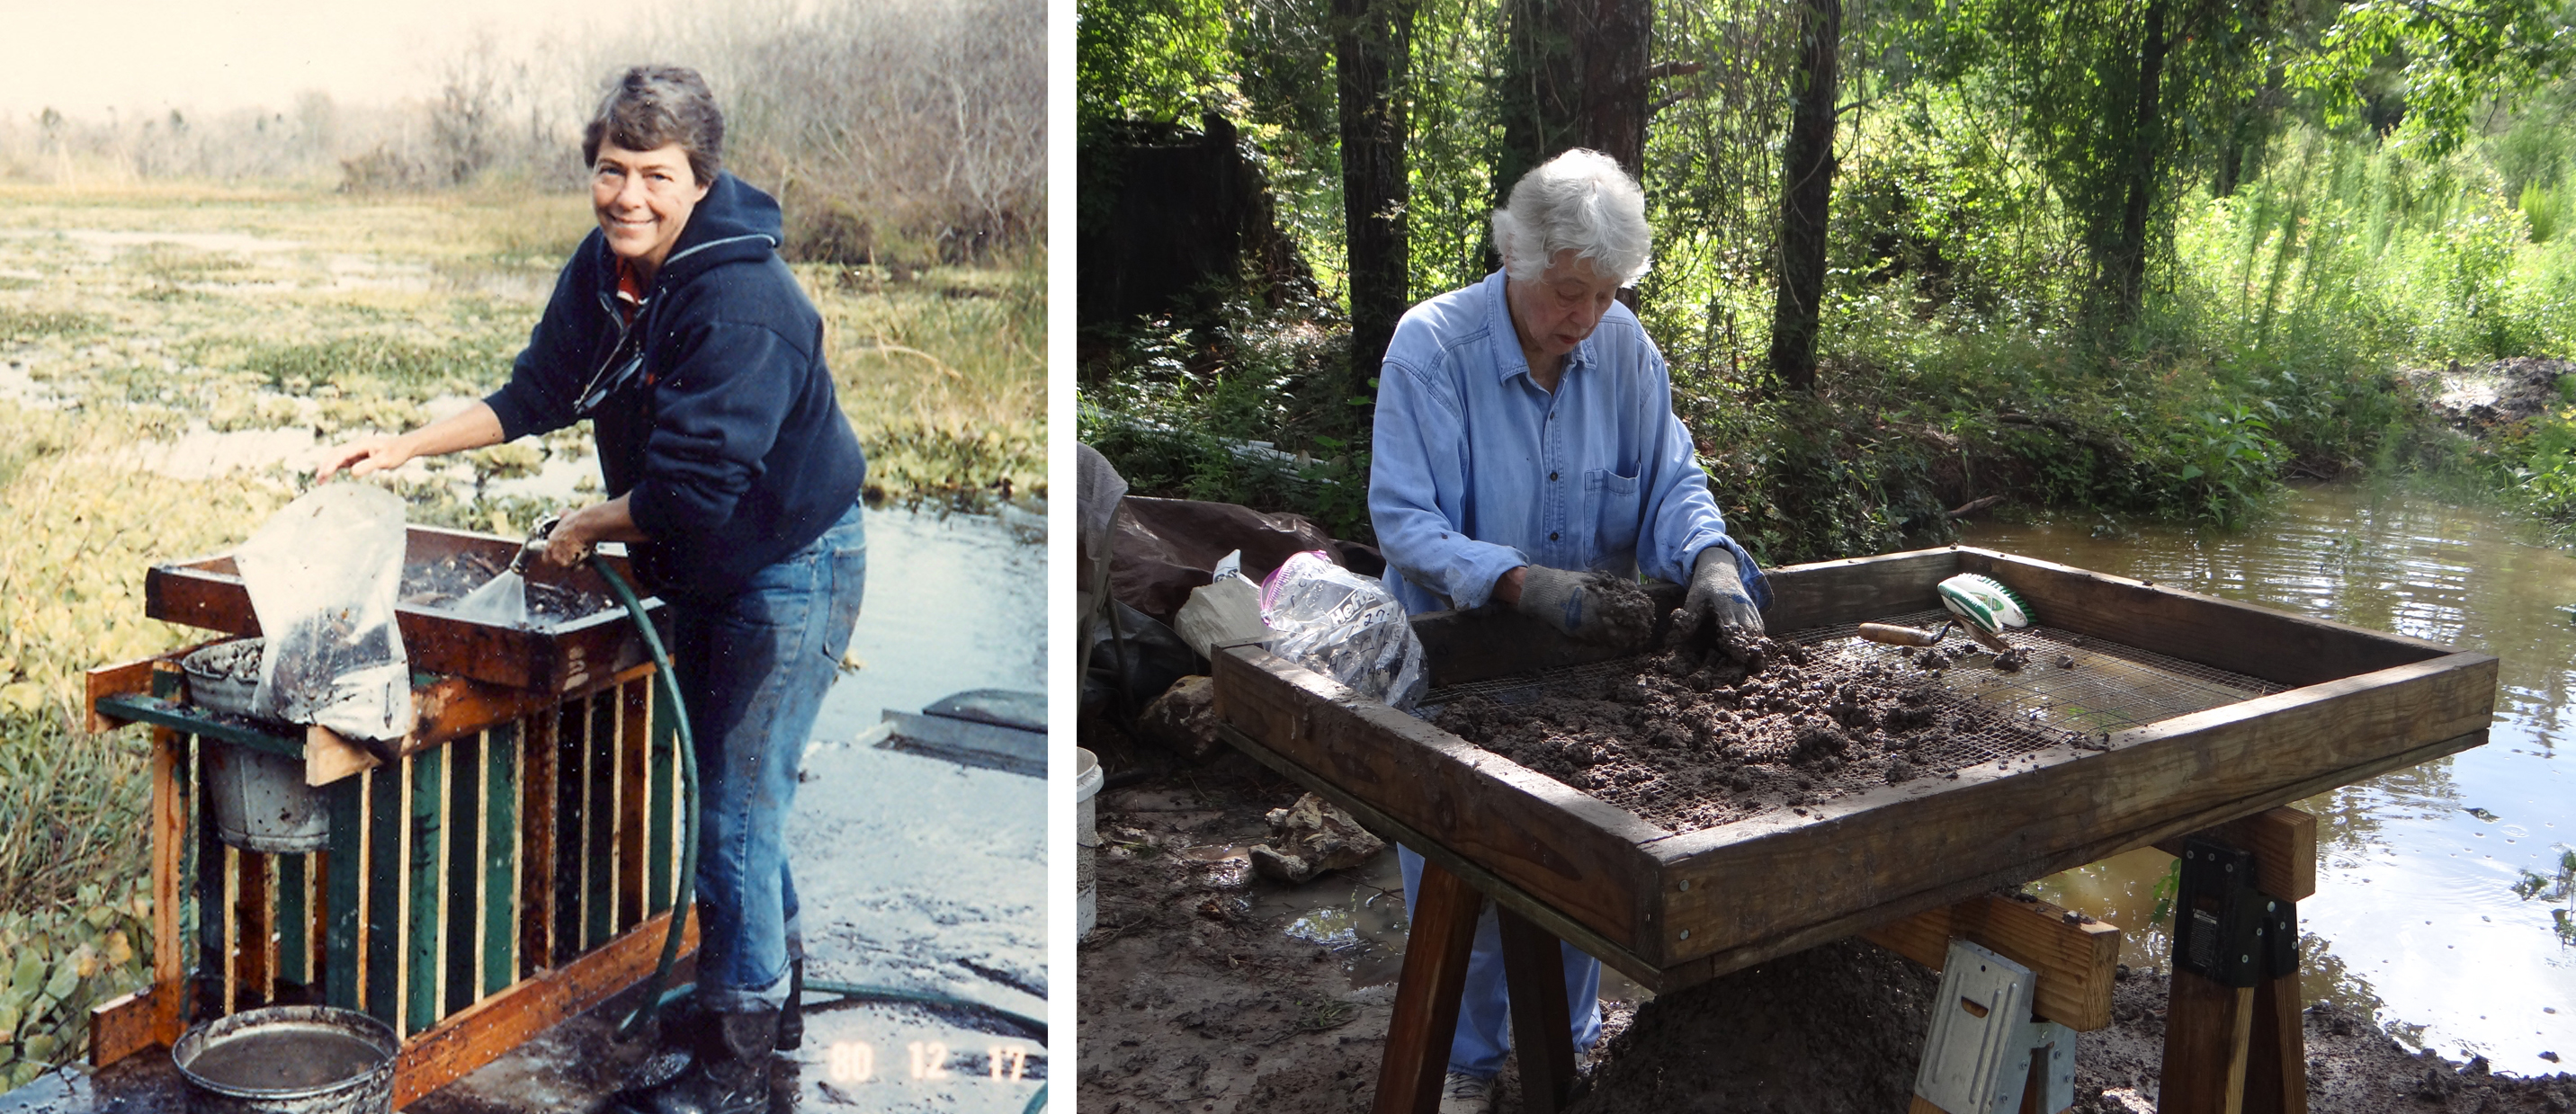 Two images of archaeologist Barbara Purdy: Barbara Purdy during excavations at Hontoon Island, 1980 (left) and revisiting the Container Corporation of America site in Marion County, Florida, in 2017.